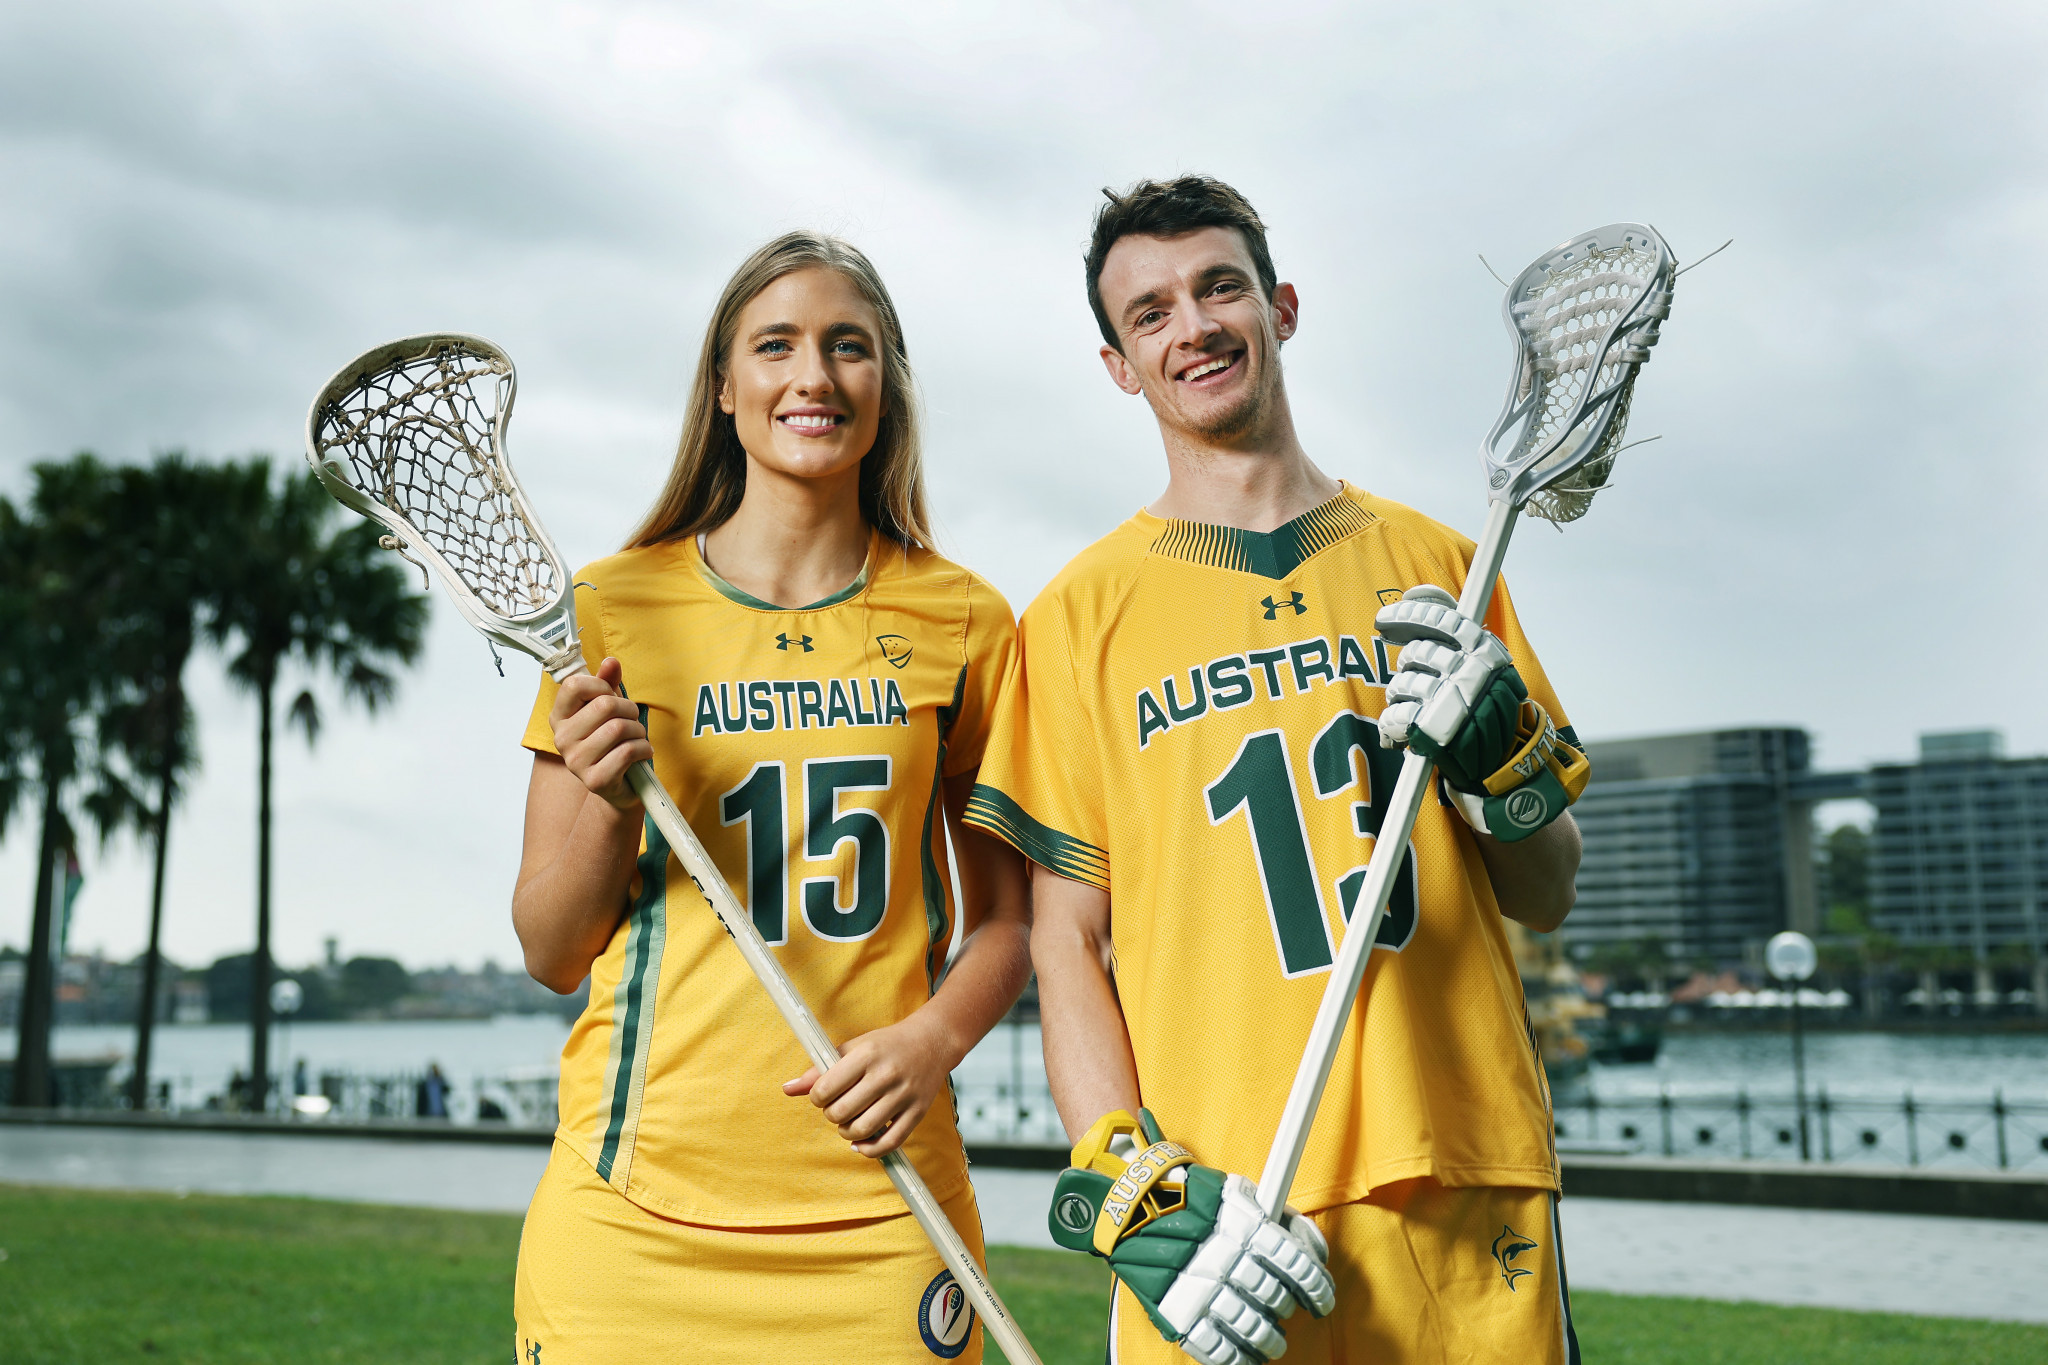 Lacrosse is one of the sports which has been added, providing an opportunity for Australian athletes ©Getty Images